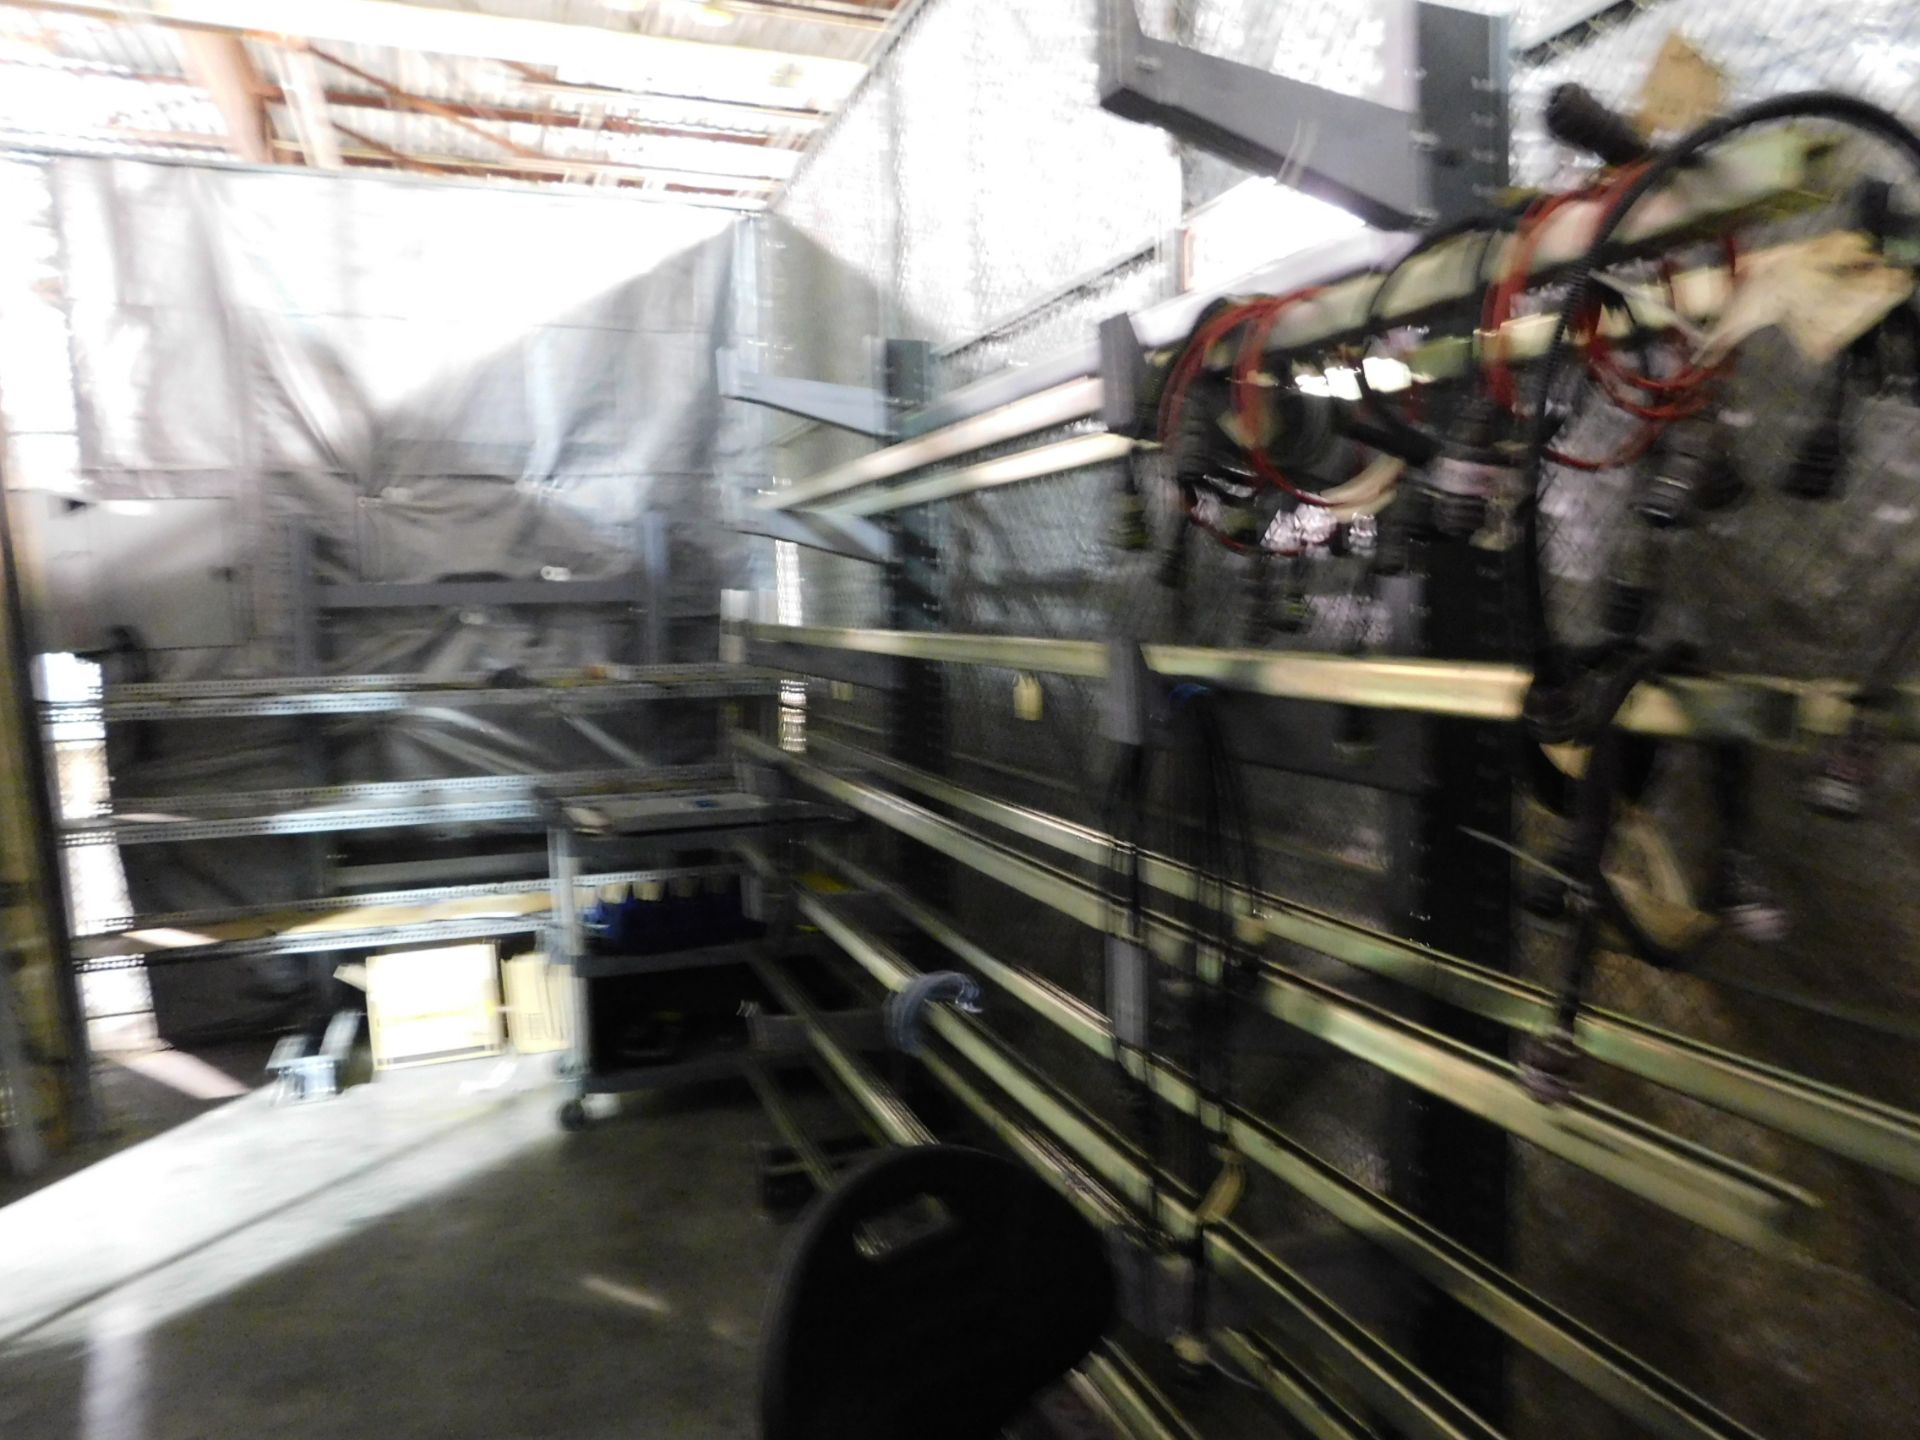 Content of cage area with electrical shafts, fuses, test desk, cantilever racking - Image 10 of 13